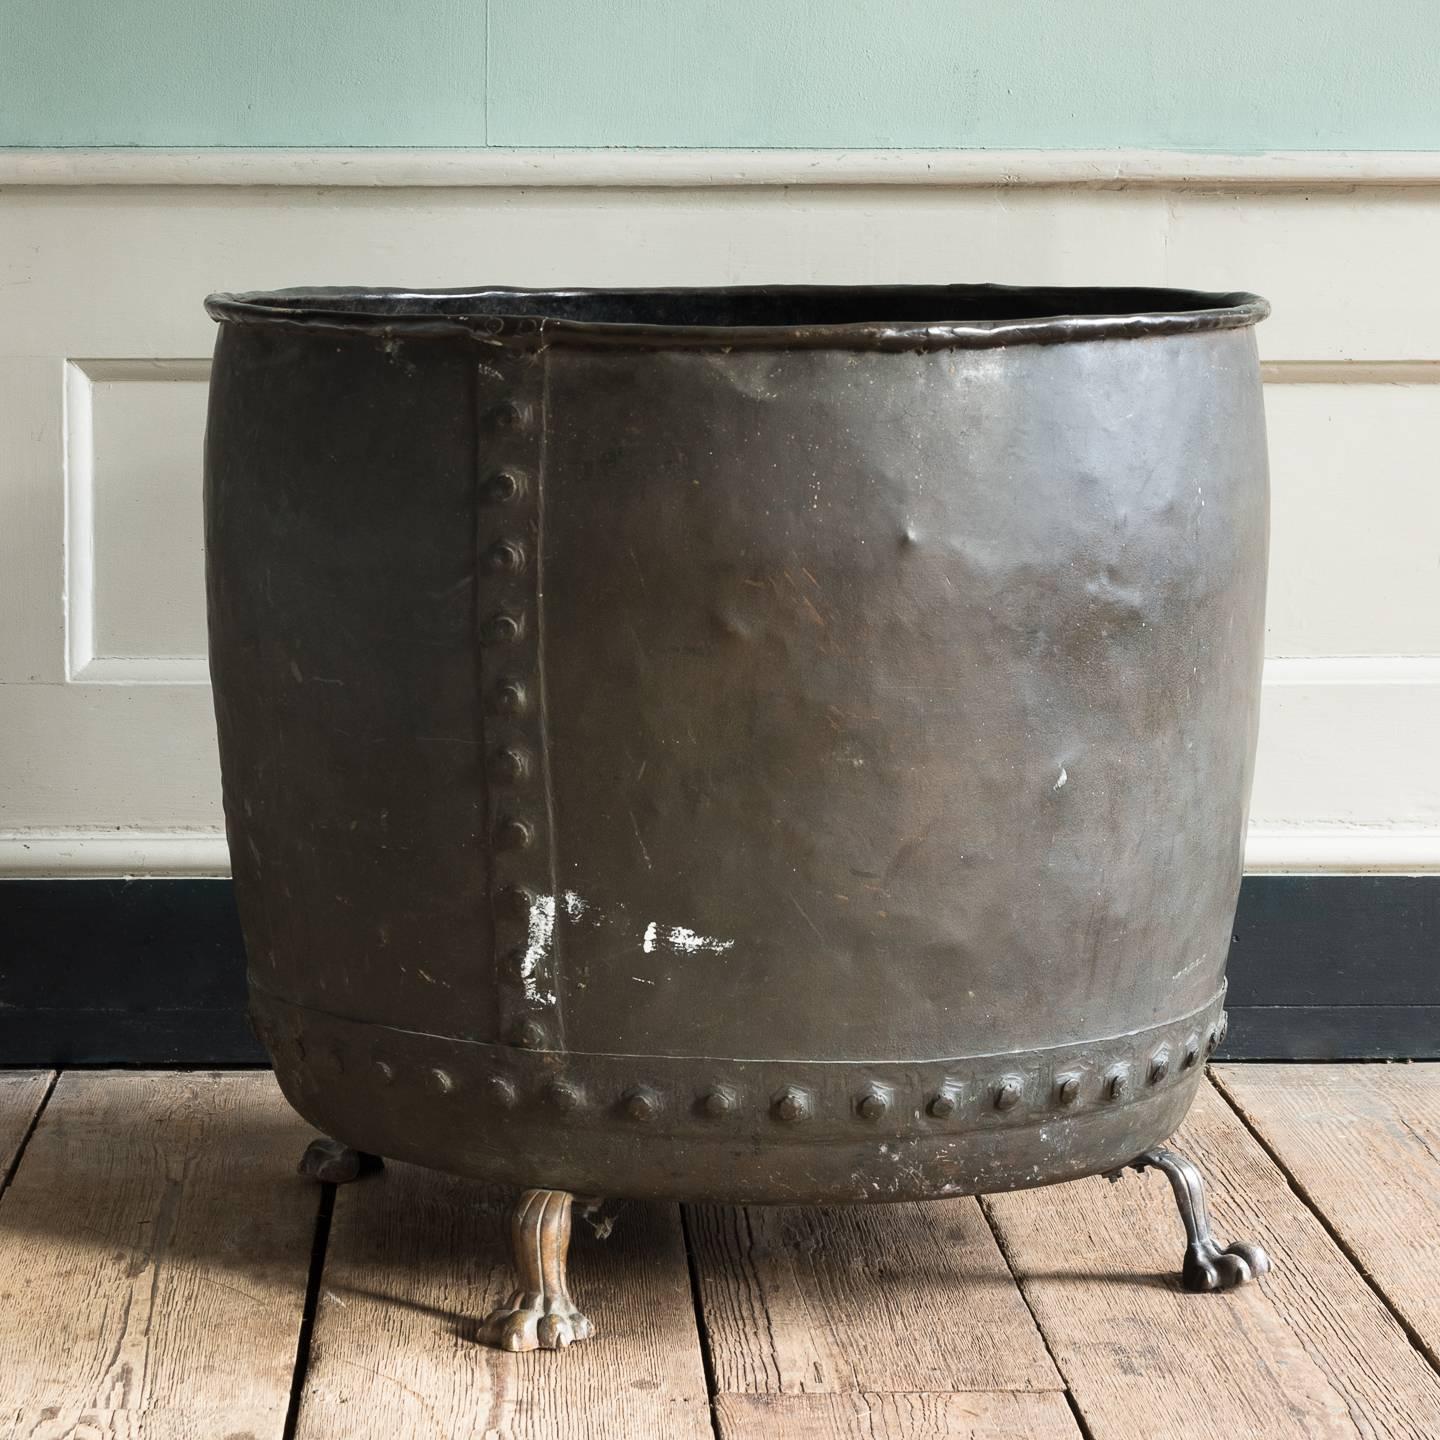 A substantial English 19th century patched and riveted copper with brass lion's paw feet, suitable for use as a log bin or a planter.